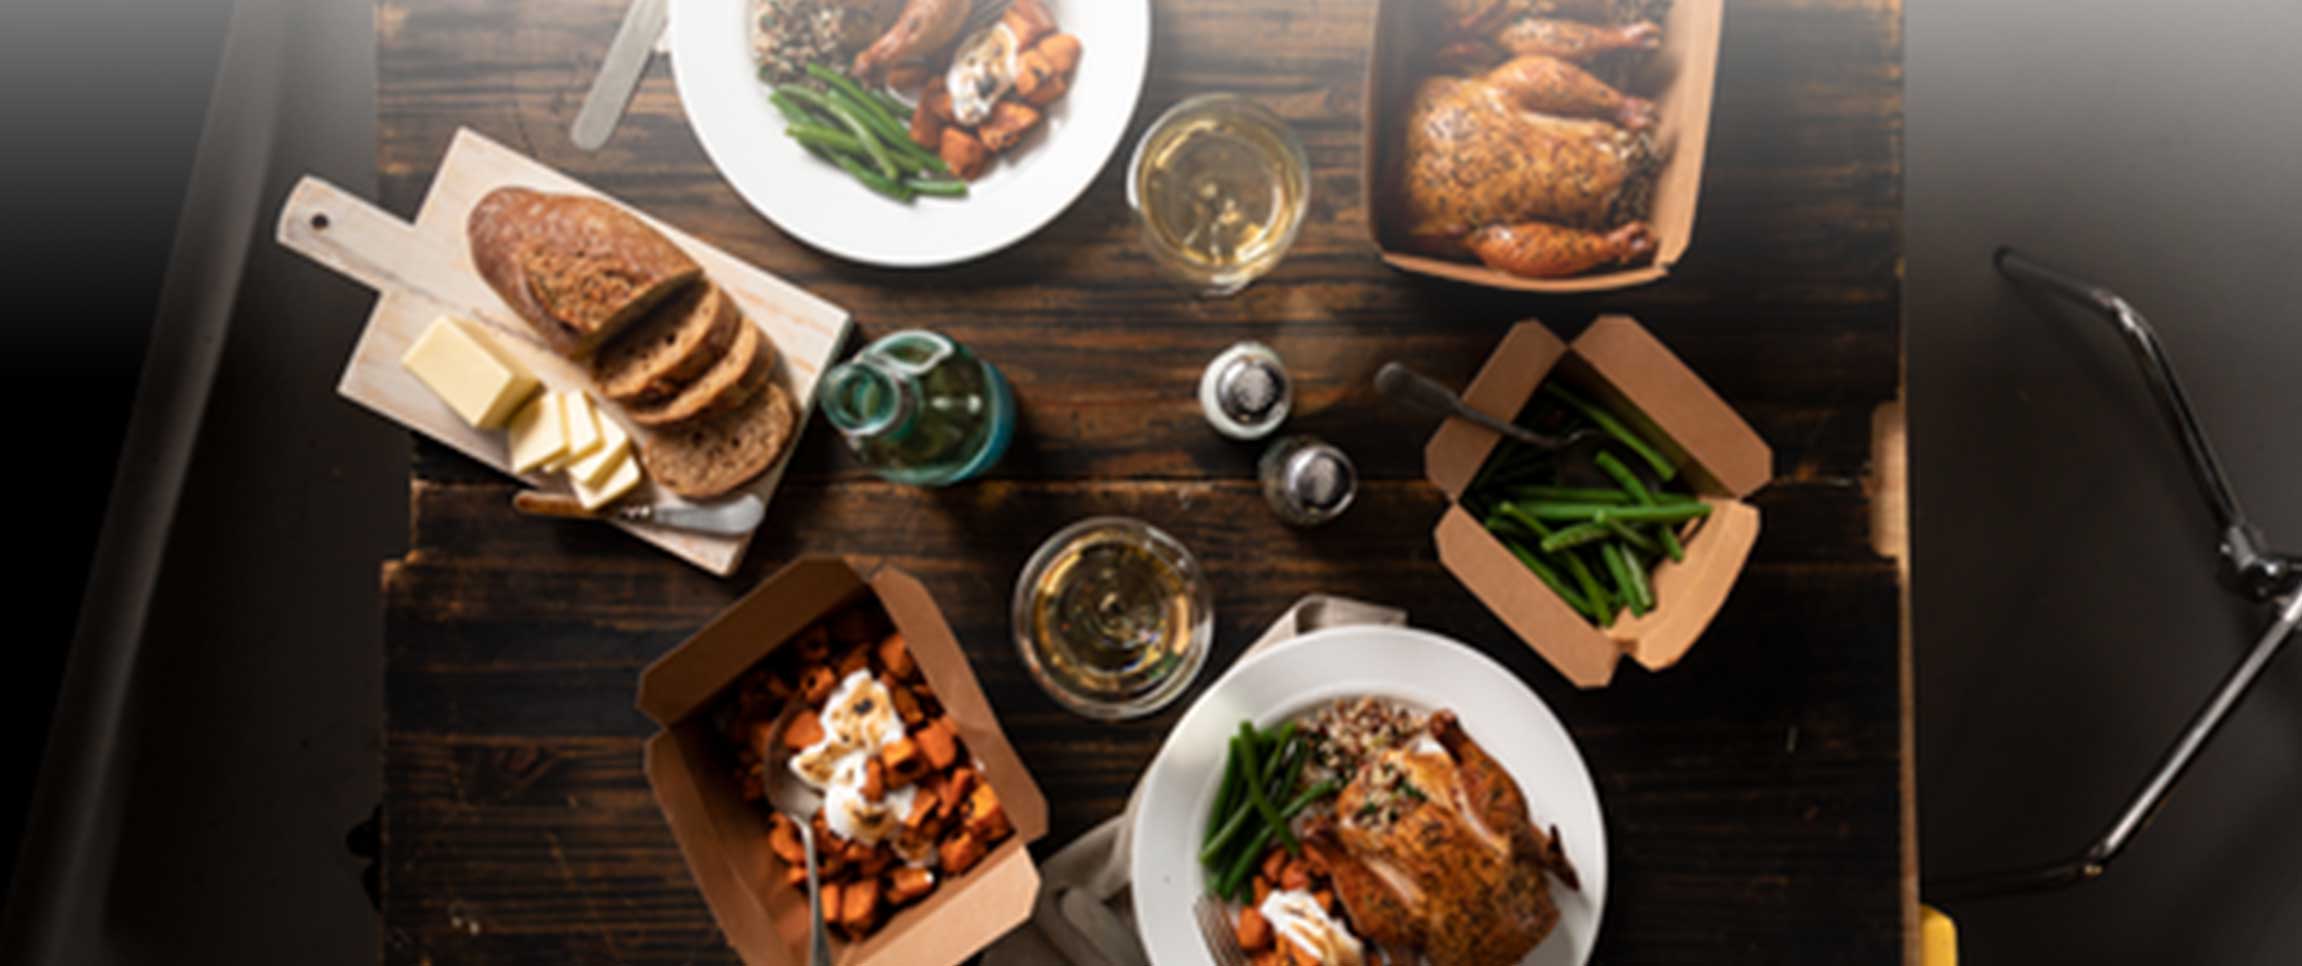 Cornish Game Hen takeout meal on table with side options